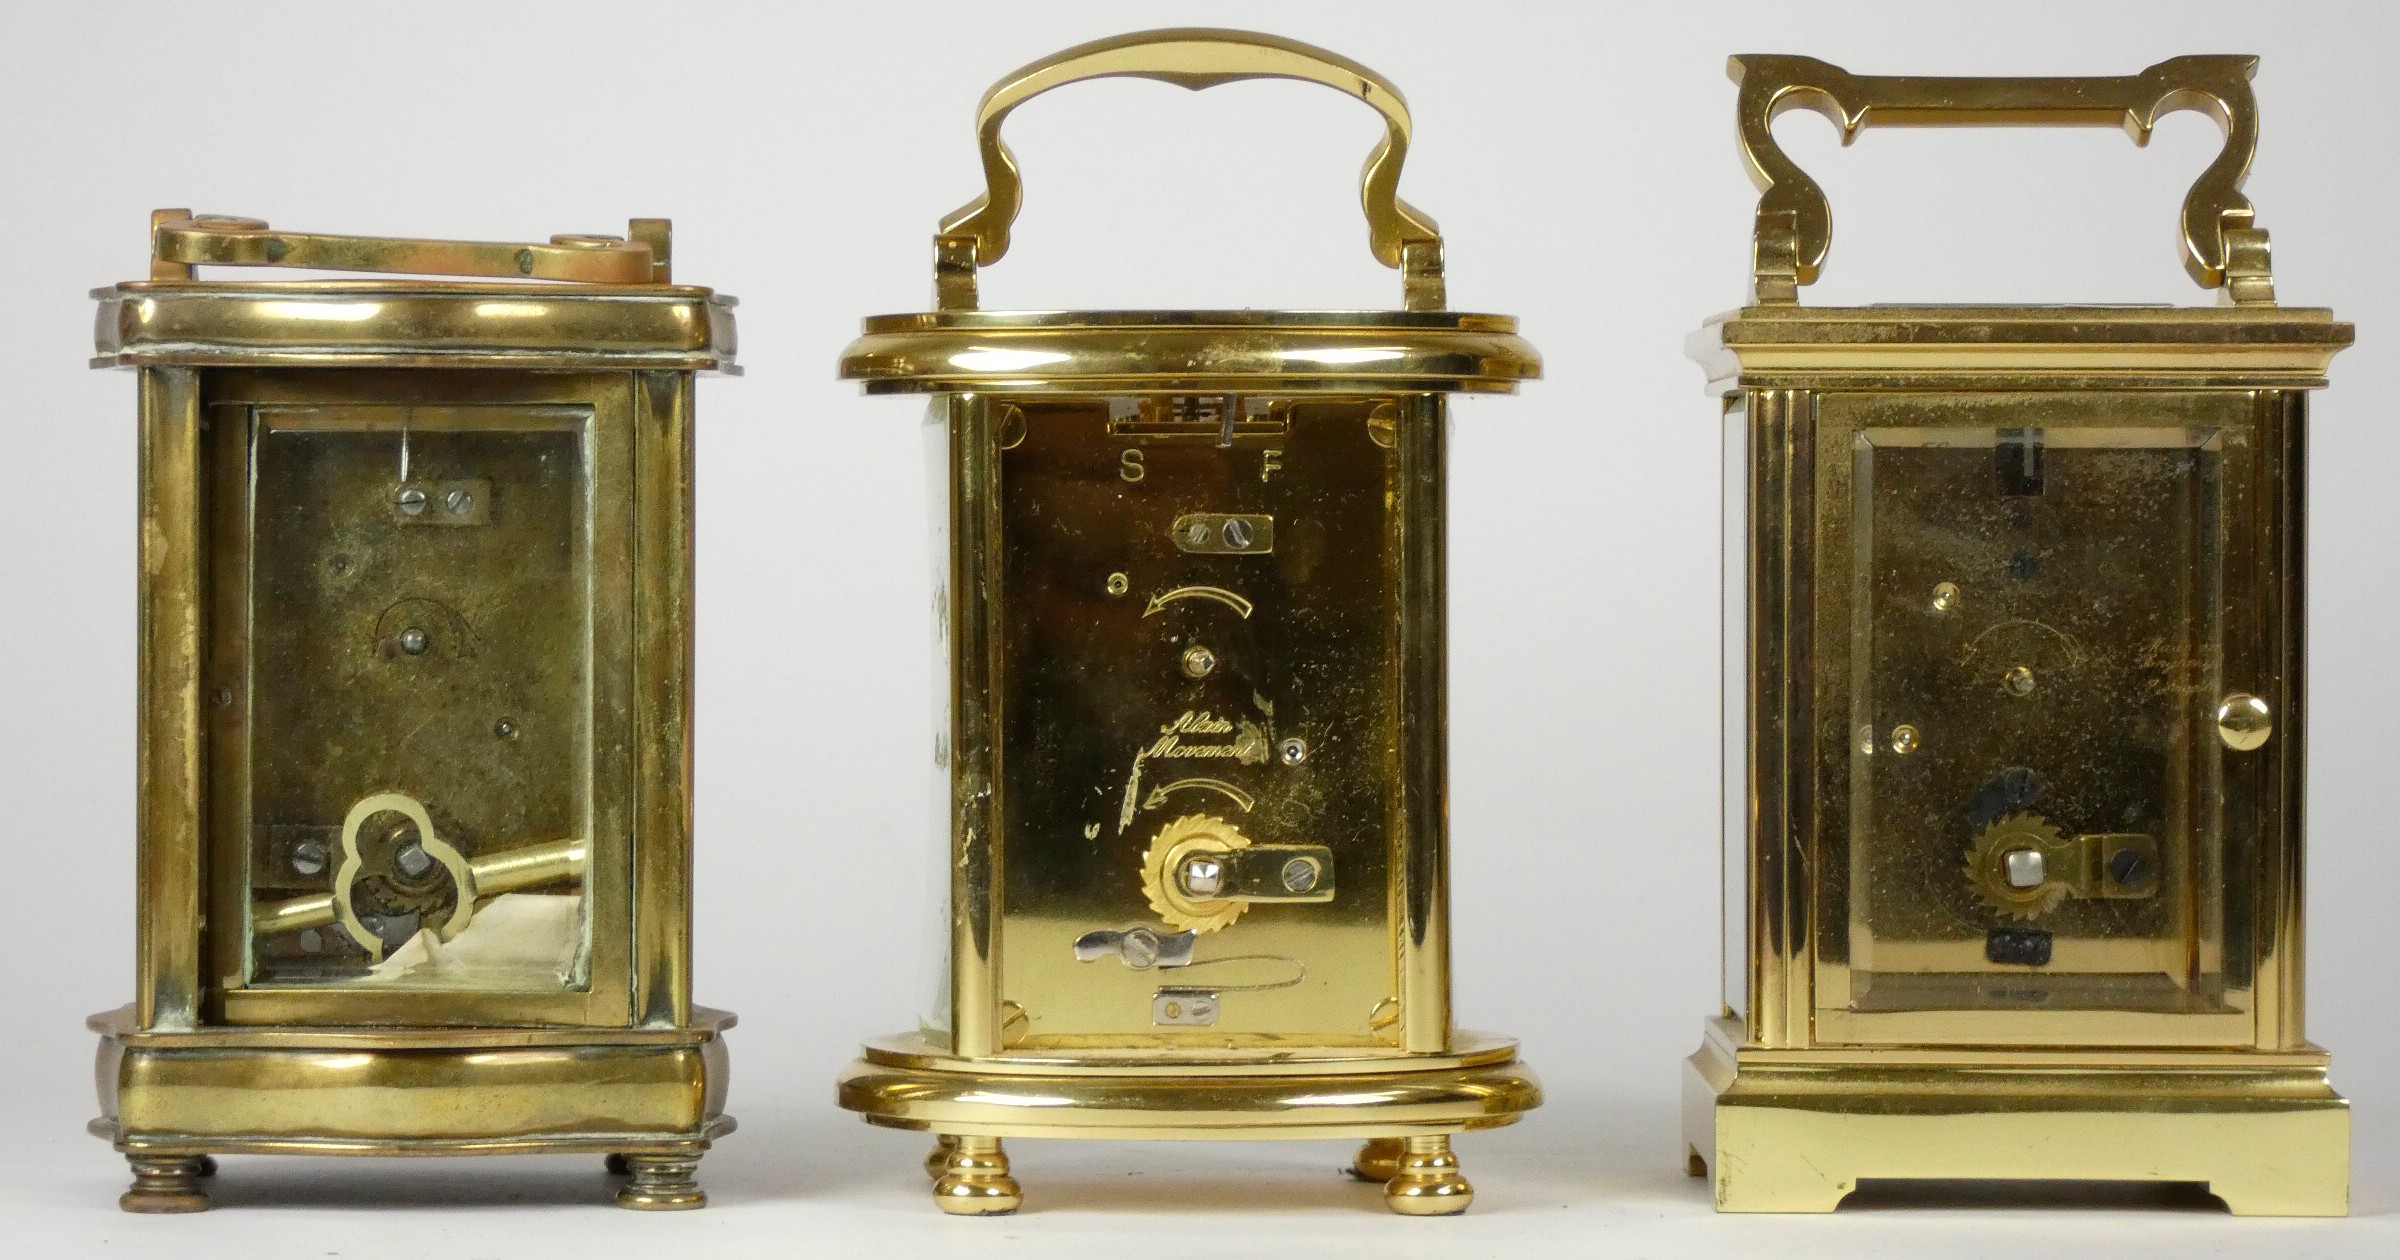 Three mid 20th Century brass carriage clocks, white enameled dials with Roman numerals, beveled edge - Image 3 of 3